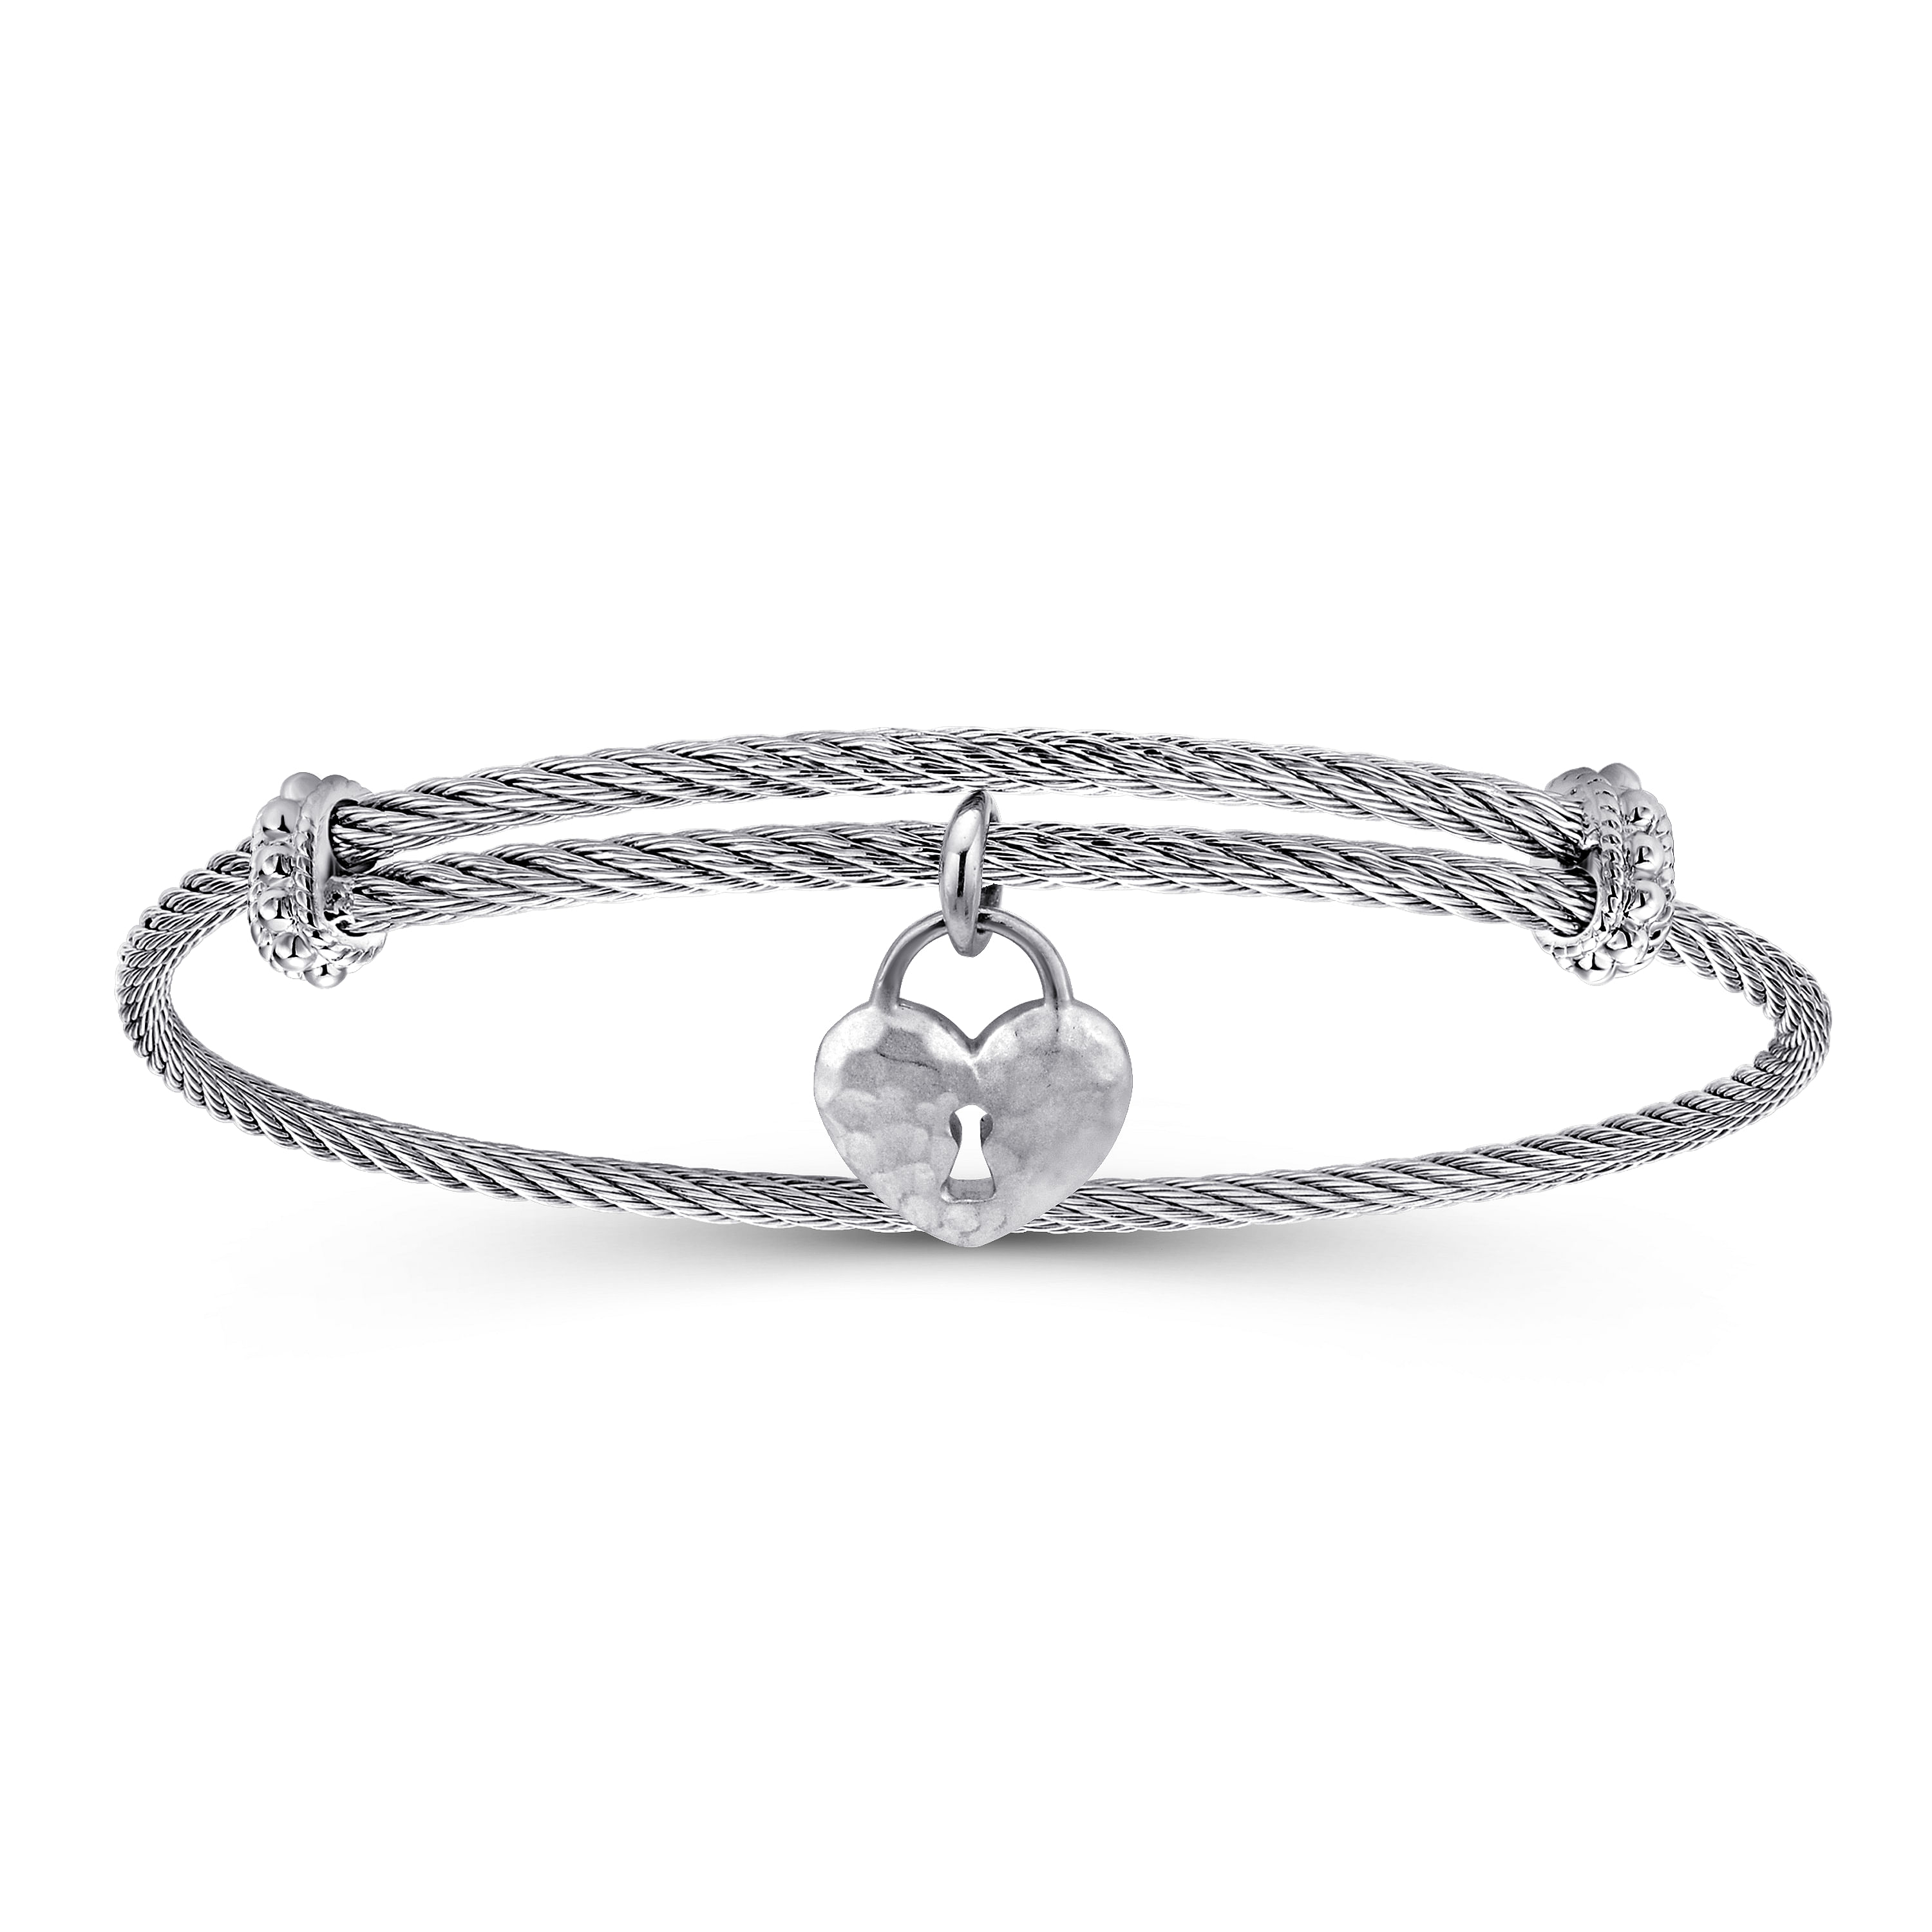 Key charm and double love heart silver bangle bracelet with pearls and adjustable with a twisted bangle design gift for her